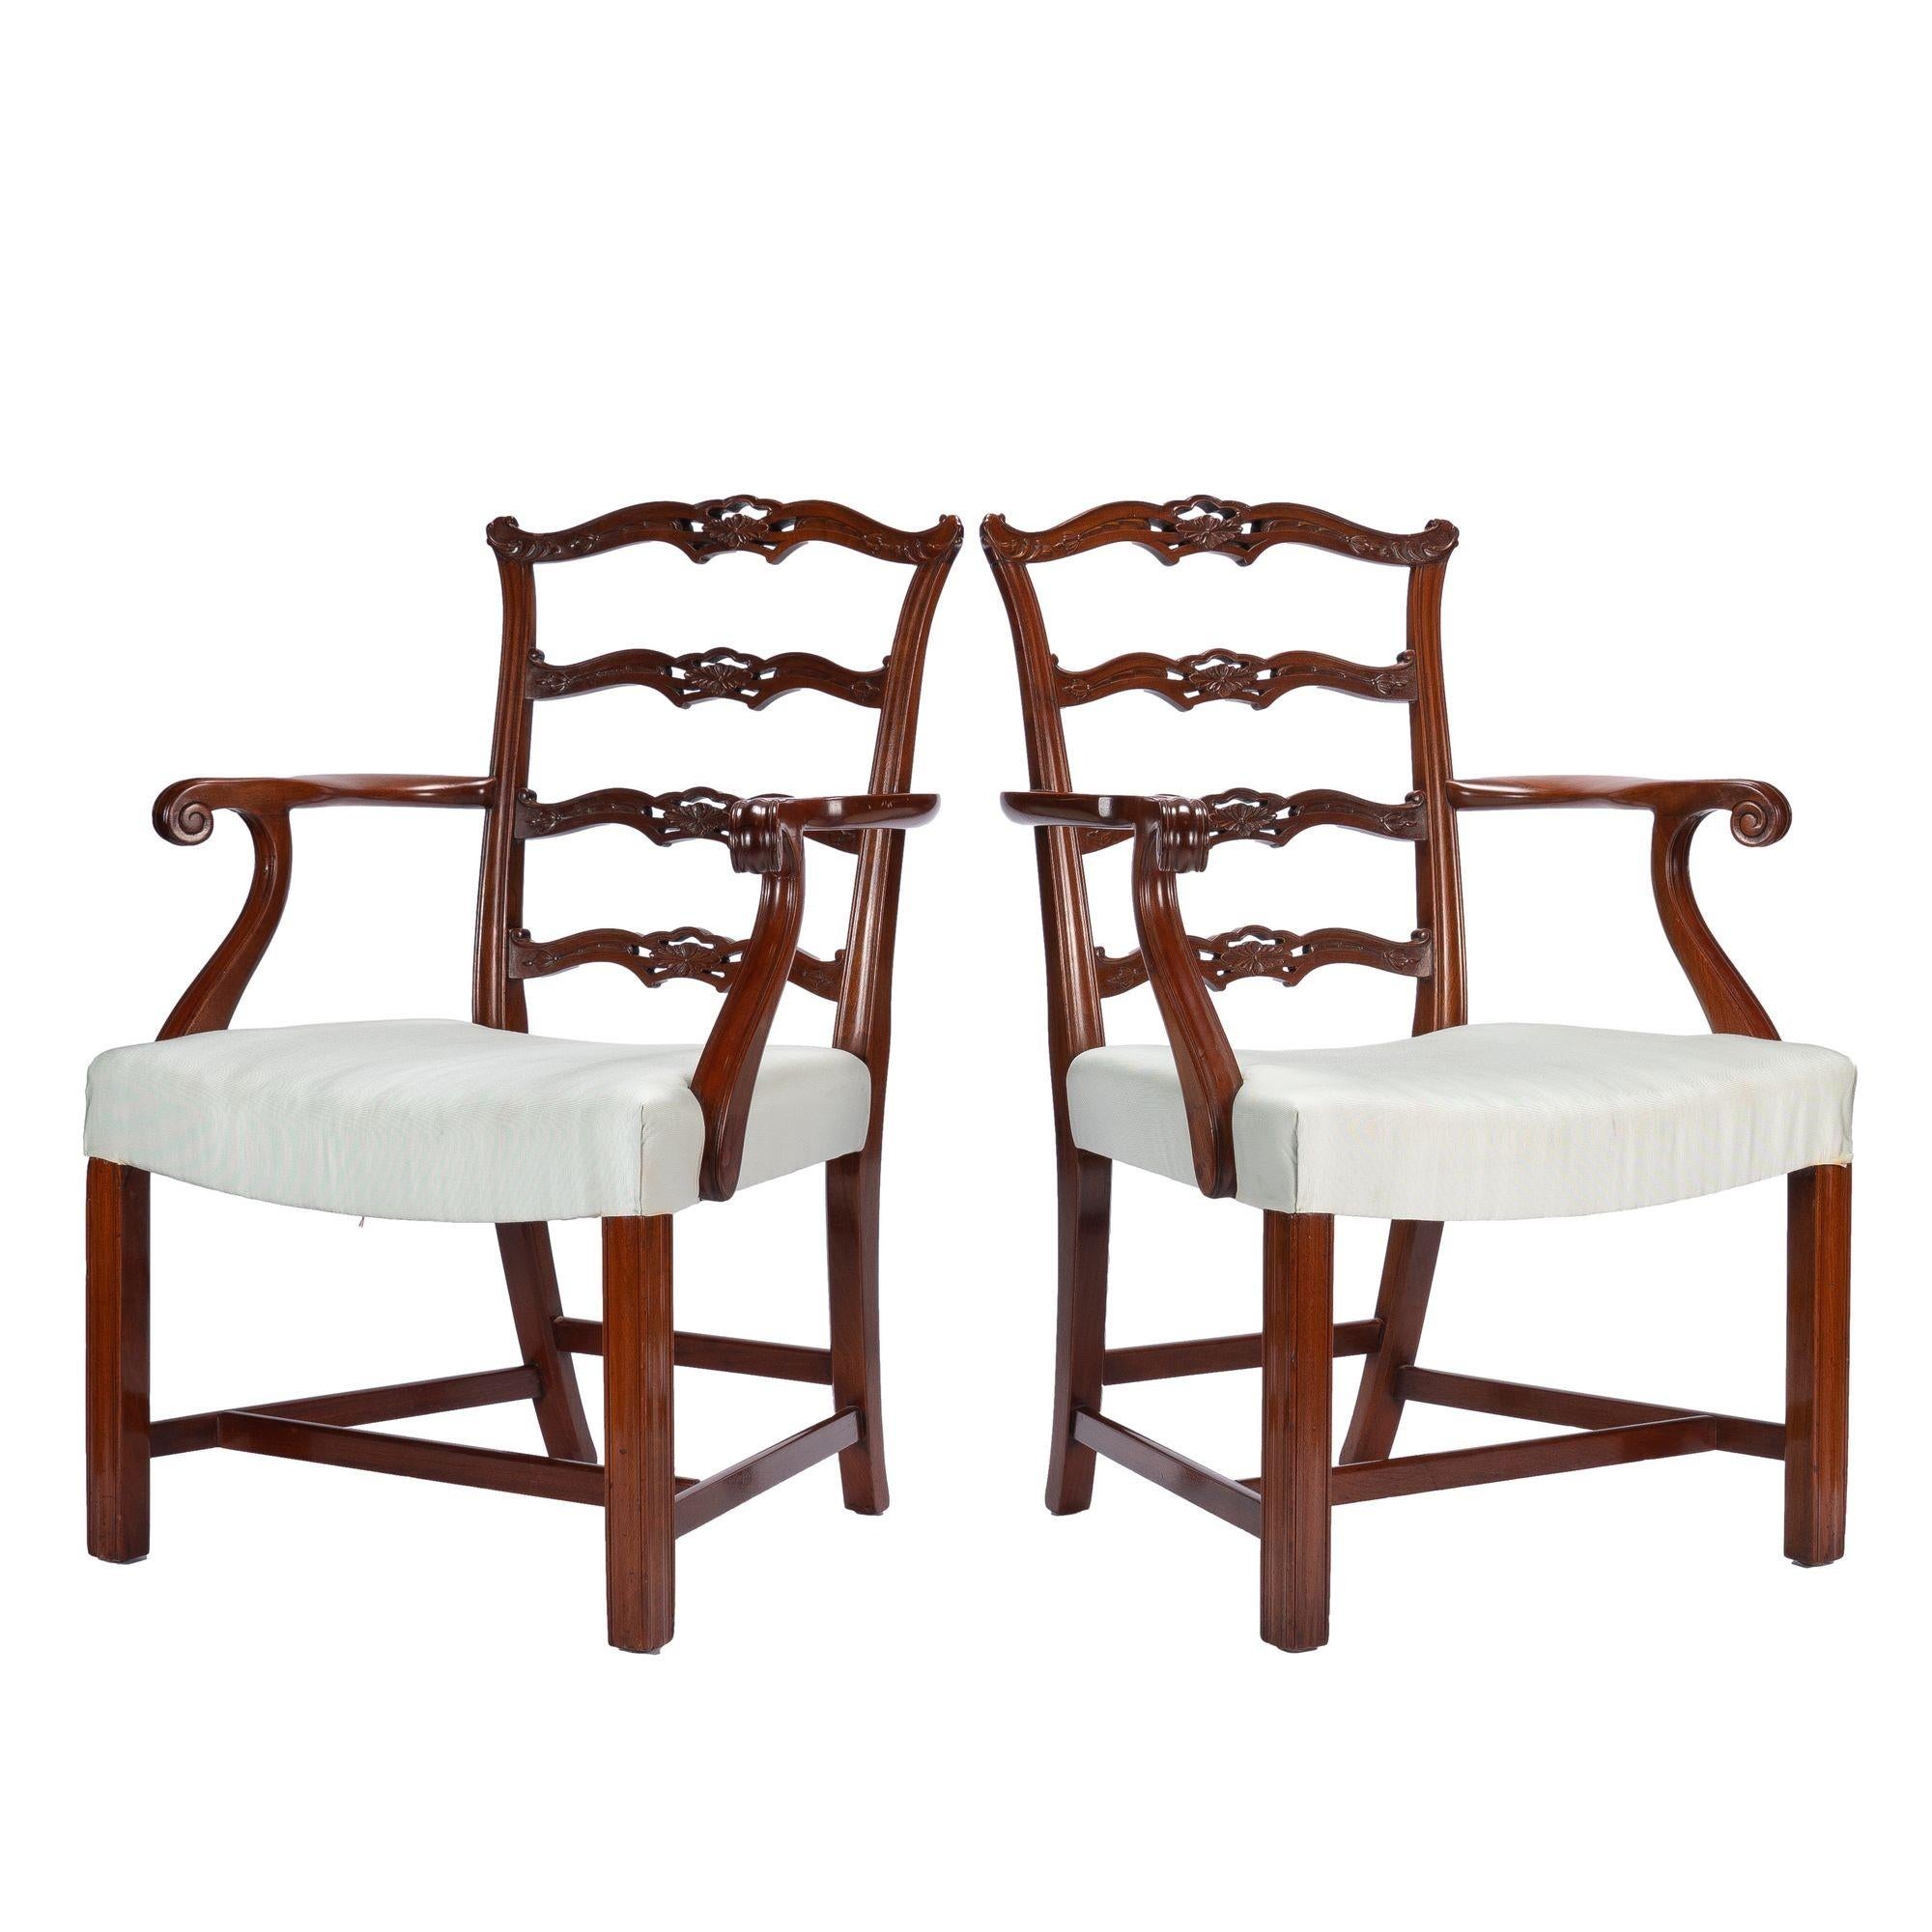 Pair of Chippendale style ladder back arm chairs, c. 1930-40 For Sale 2